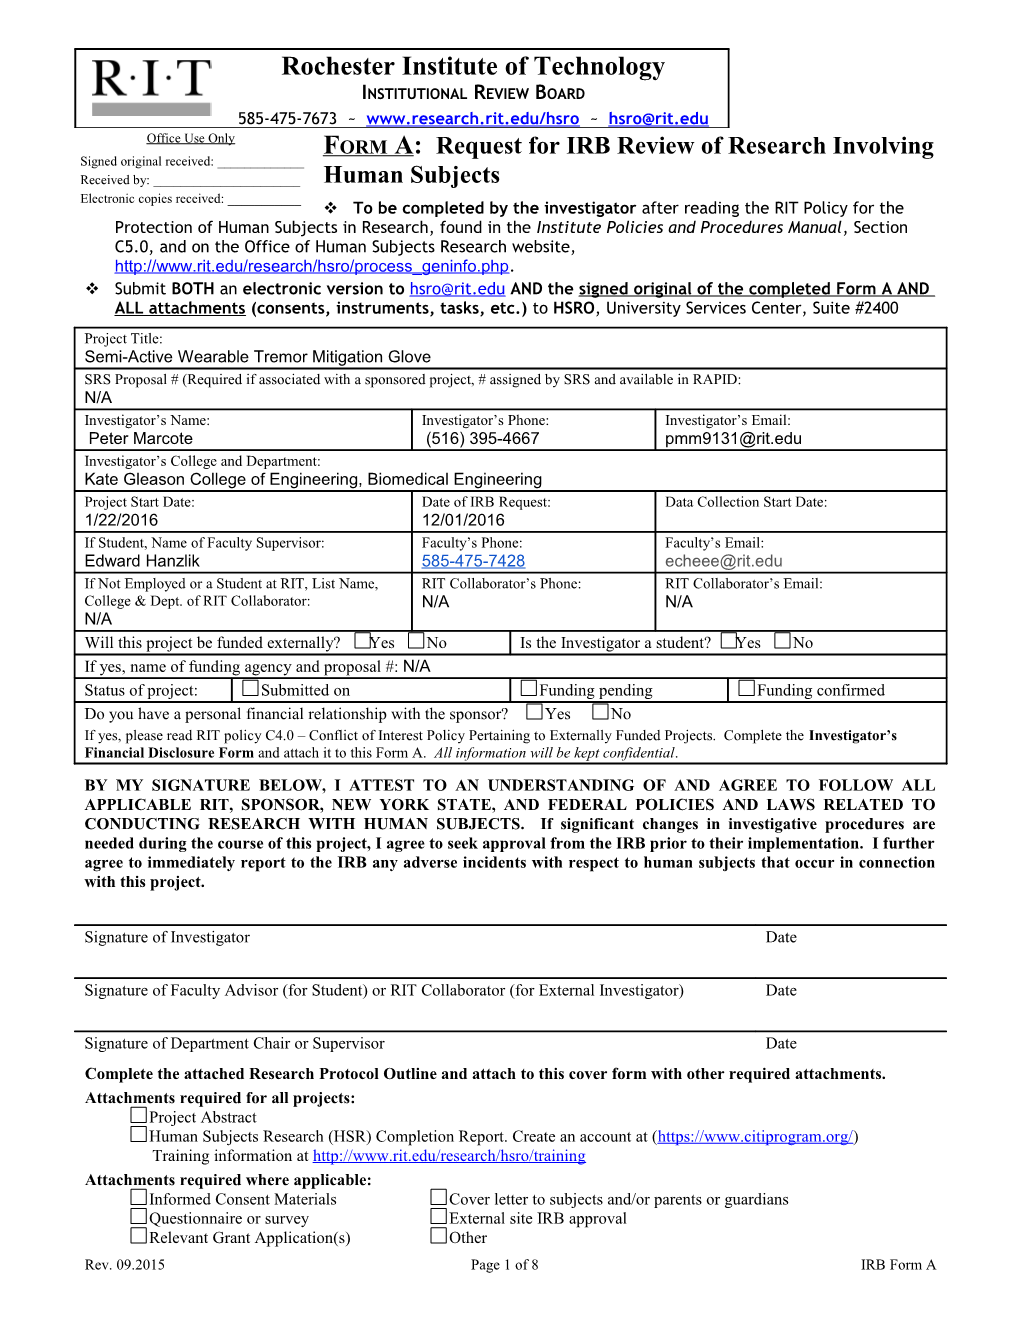 Form A: Request for IRB Review of Research Involving Human Subjects